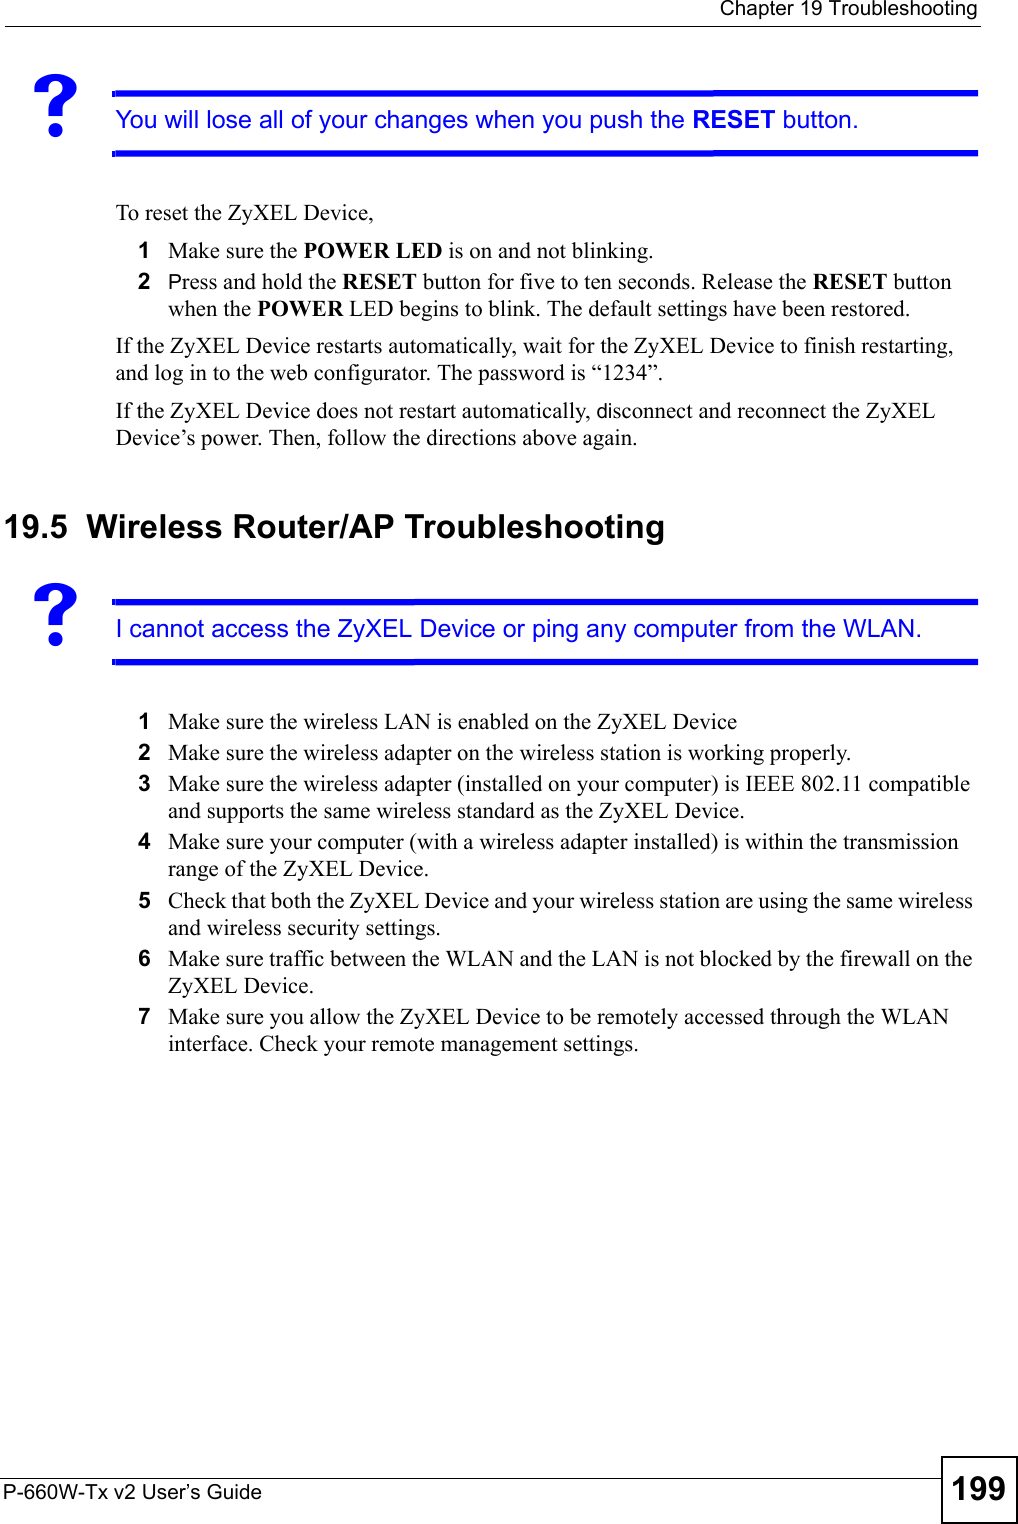  Chapter 19 TroubleshootingP-660W-Tx v2 User’s Guide 199VYou will lose all of your changes when you push the RESET button.To reset the ZyXEL Device,1Make sure the POWER LED is on and not blinking. 2Press and hold the RESET button for five to ten seconds. Release the RESET button when the POWER LED begins to blink. The default settings have been restored.If the ZyXEL Device restarts automatically, wait for the ZyXEL Device to finish restarting, and log in to the web configurator. The password is “1234”.If the ZyXEL Device does not restart automatically, disconnect and reconnect the ZyXEL Device’s power. Then, follow the directions above again.19.5  Wireless Router/AP TroubleshootingVI cannot access the ZyXEL Device or ping any computer from the WLAN.1Make sure the wireless LAN is enabled on the ZyXEL Device2Make sure the wireless adapter on the wireless station is working properly.3Make sure the wireless adapter (installed on your computer) is IEEE 802.11 compatible and supports the same wireless standard as the ZyXEL Device.4Make sure your computer (with a wireless adapter installed) is within the transmission range of the ZyXEL Device.5Check that both the ZyXEL Device and your wireless station are using the same wireless and wireless security settings.6Make sure traffic between the WLAN and the LAN is not blocked by the firewall on the ZyXEL Device. 7Make sure you allow the ZyXEL Device to be remotely accessed through the WLAN interface. Check your remote management settings. 